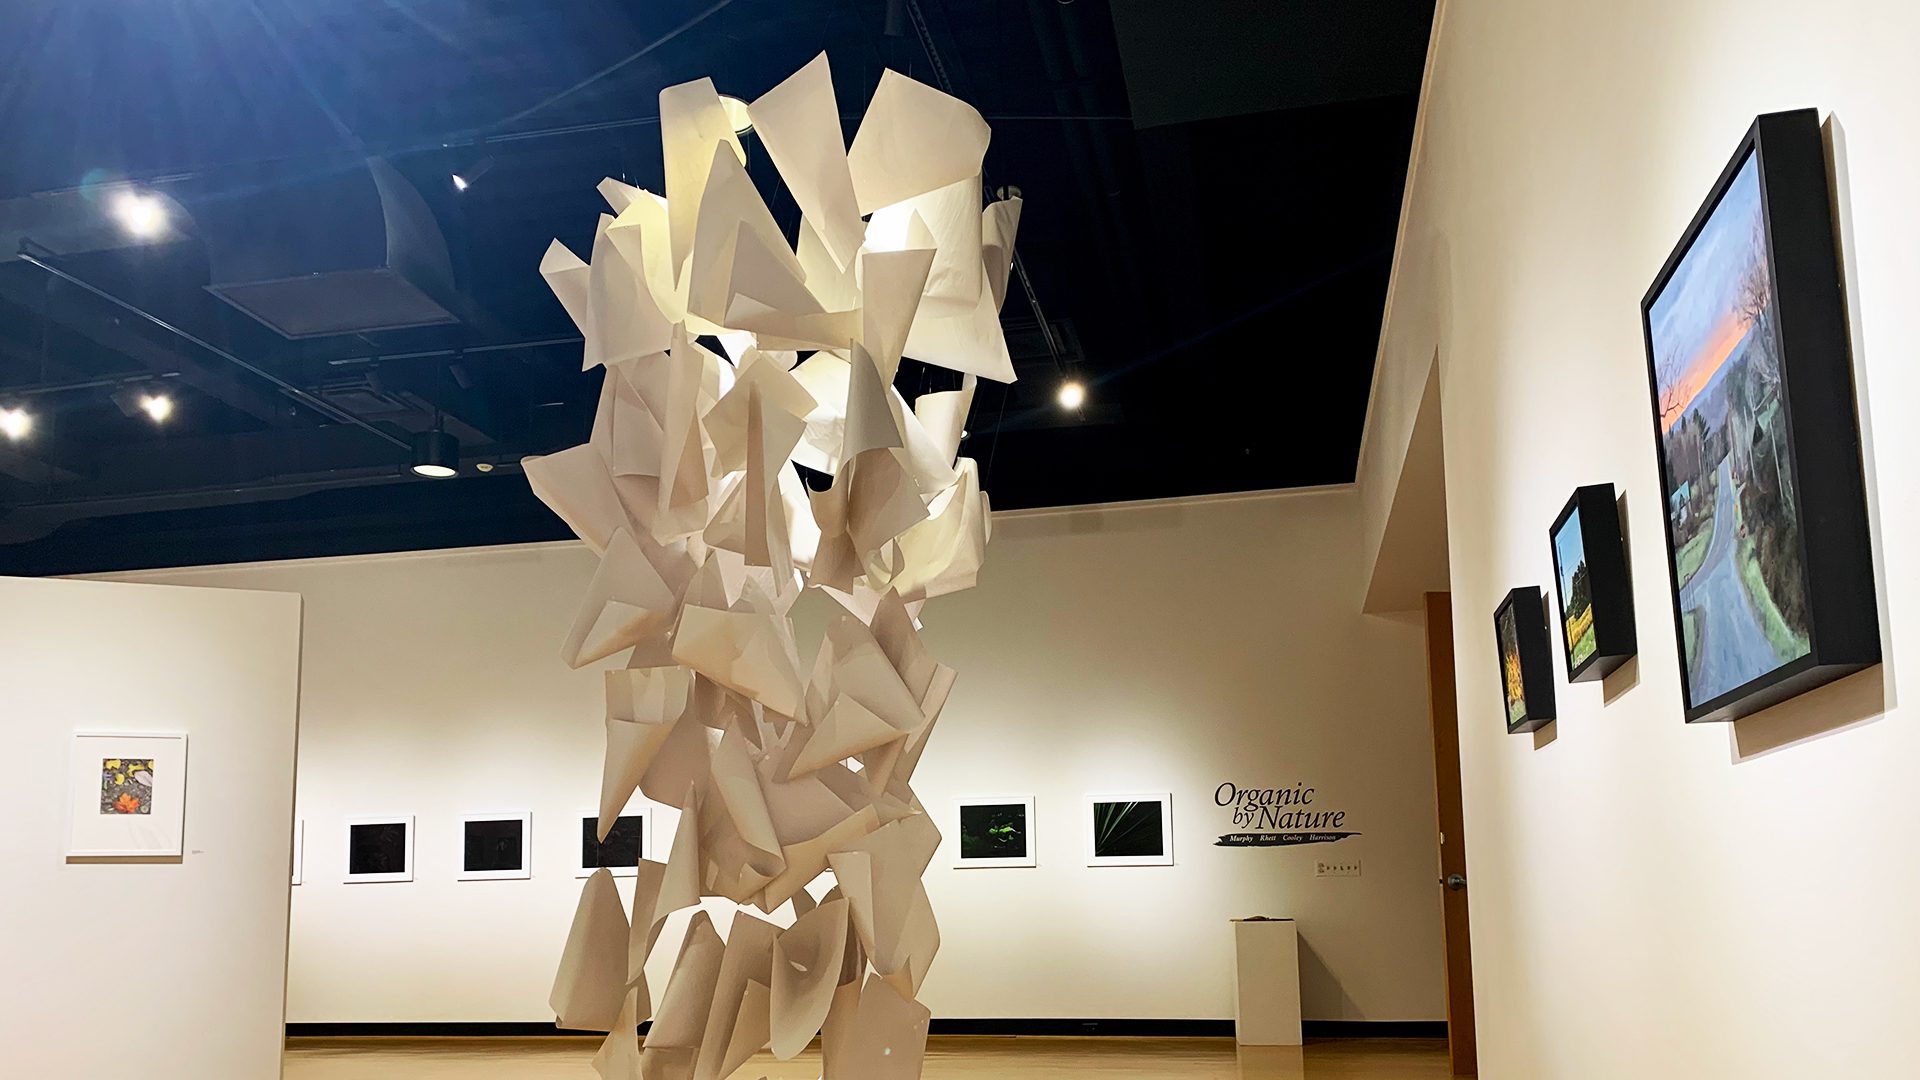 large sculpture installation and photos in the Ortlip gallery for faculty exhibit